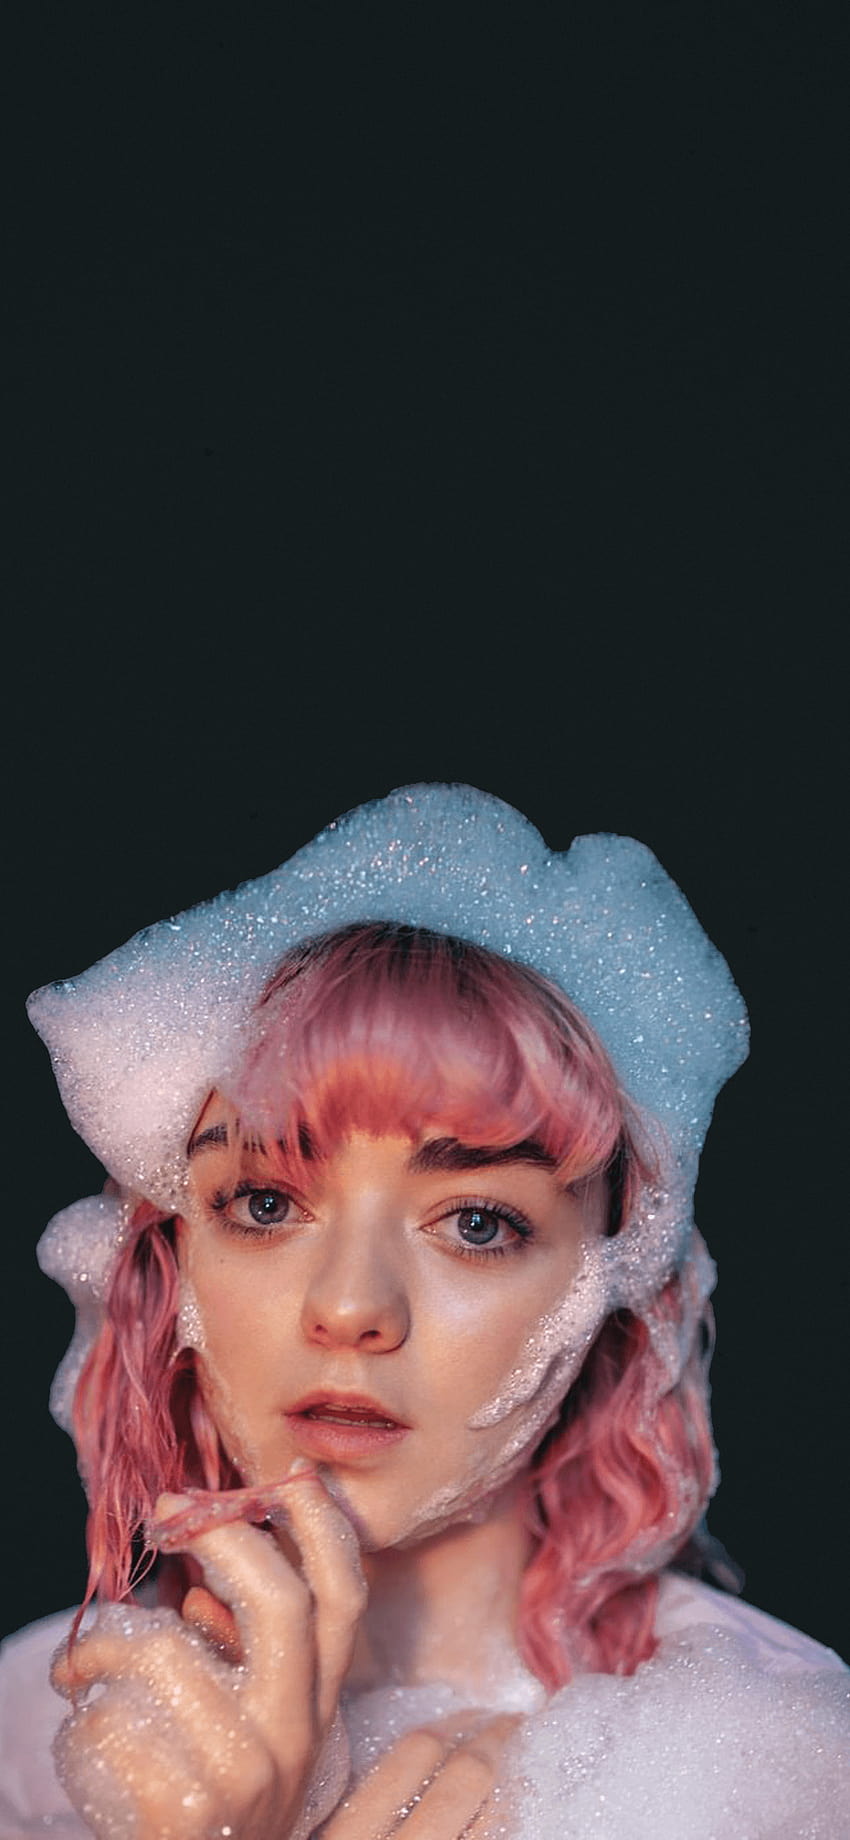 Made this for the iPhone XS Max : maisiewilliams, 2019 maisie williams HD phone wallpaper